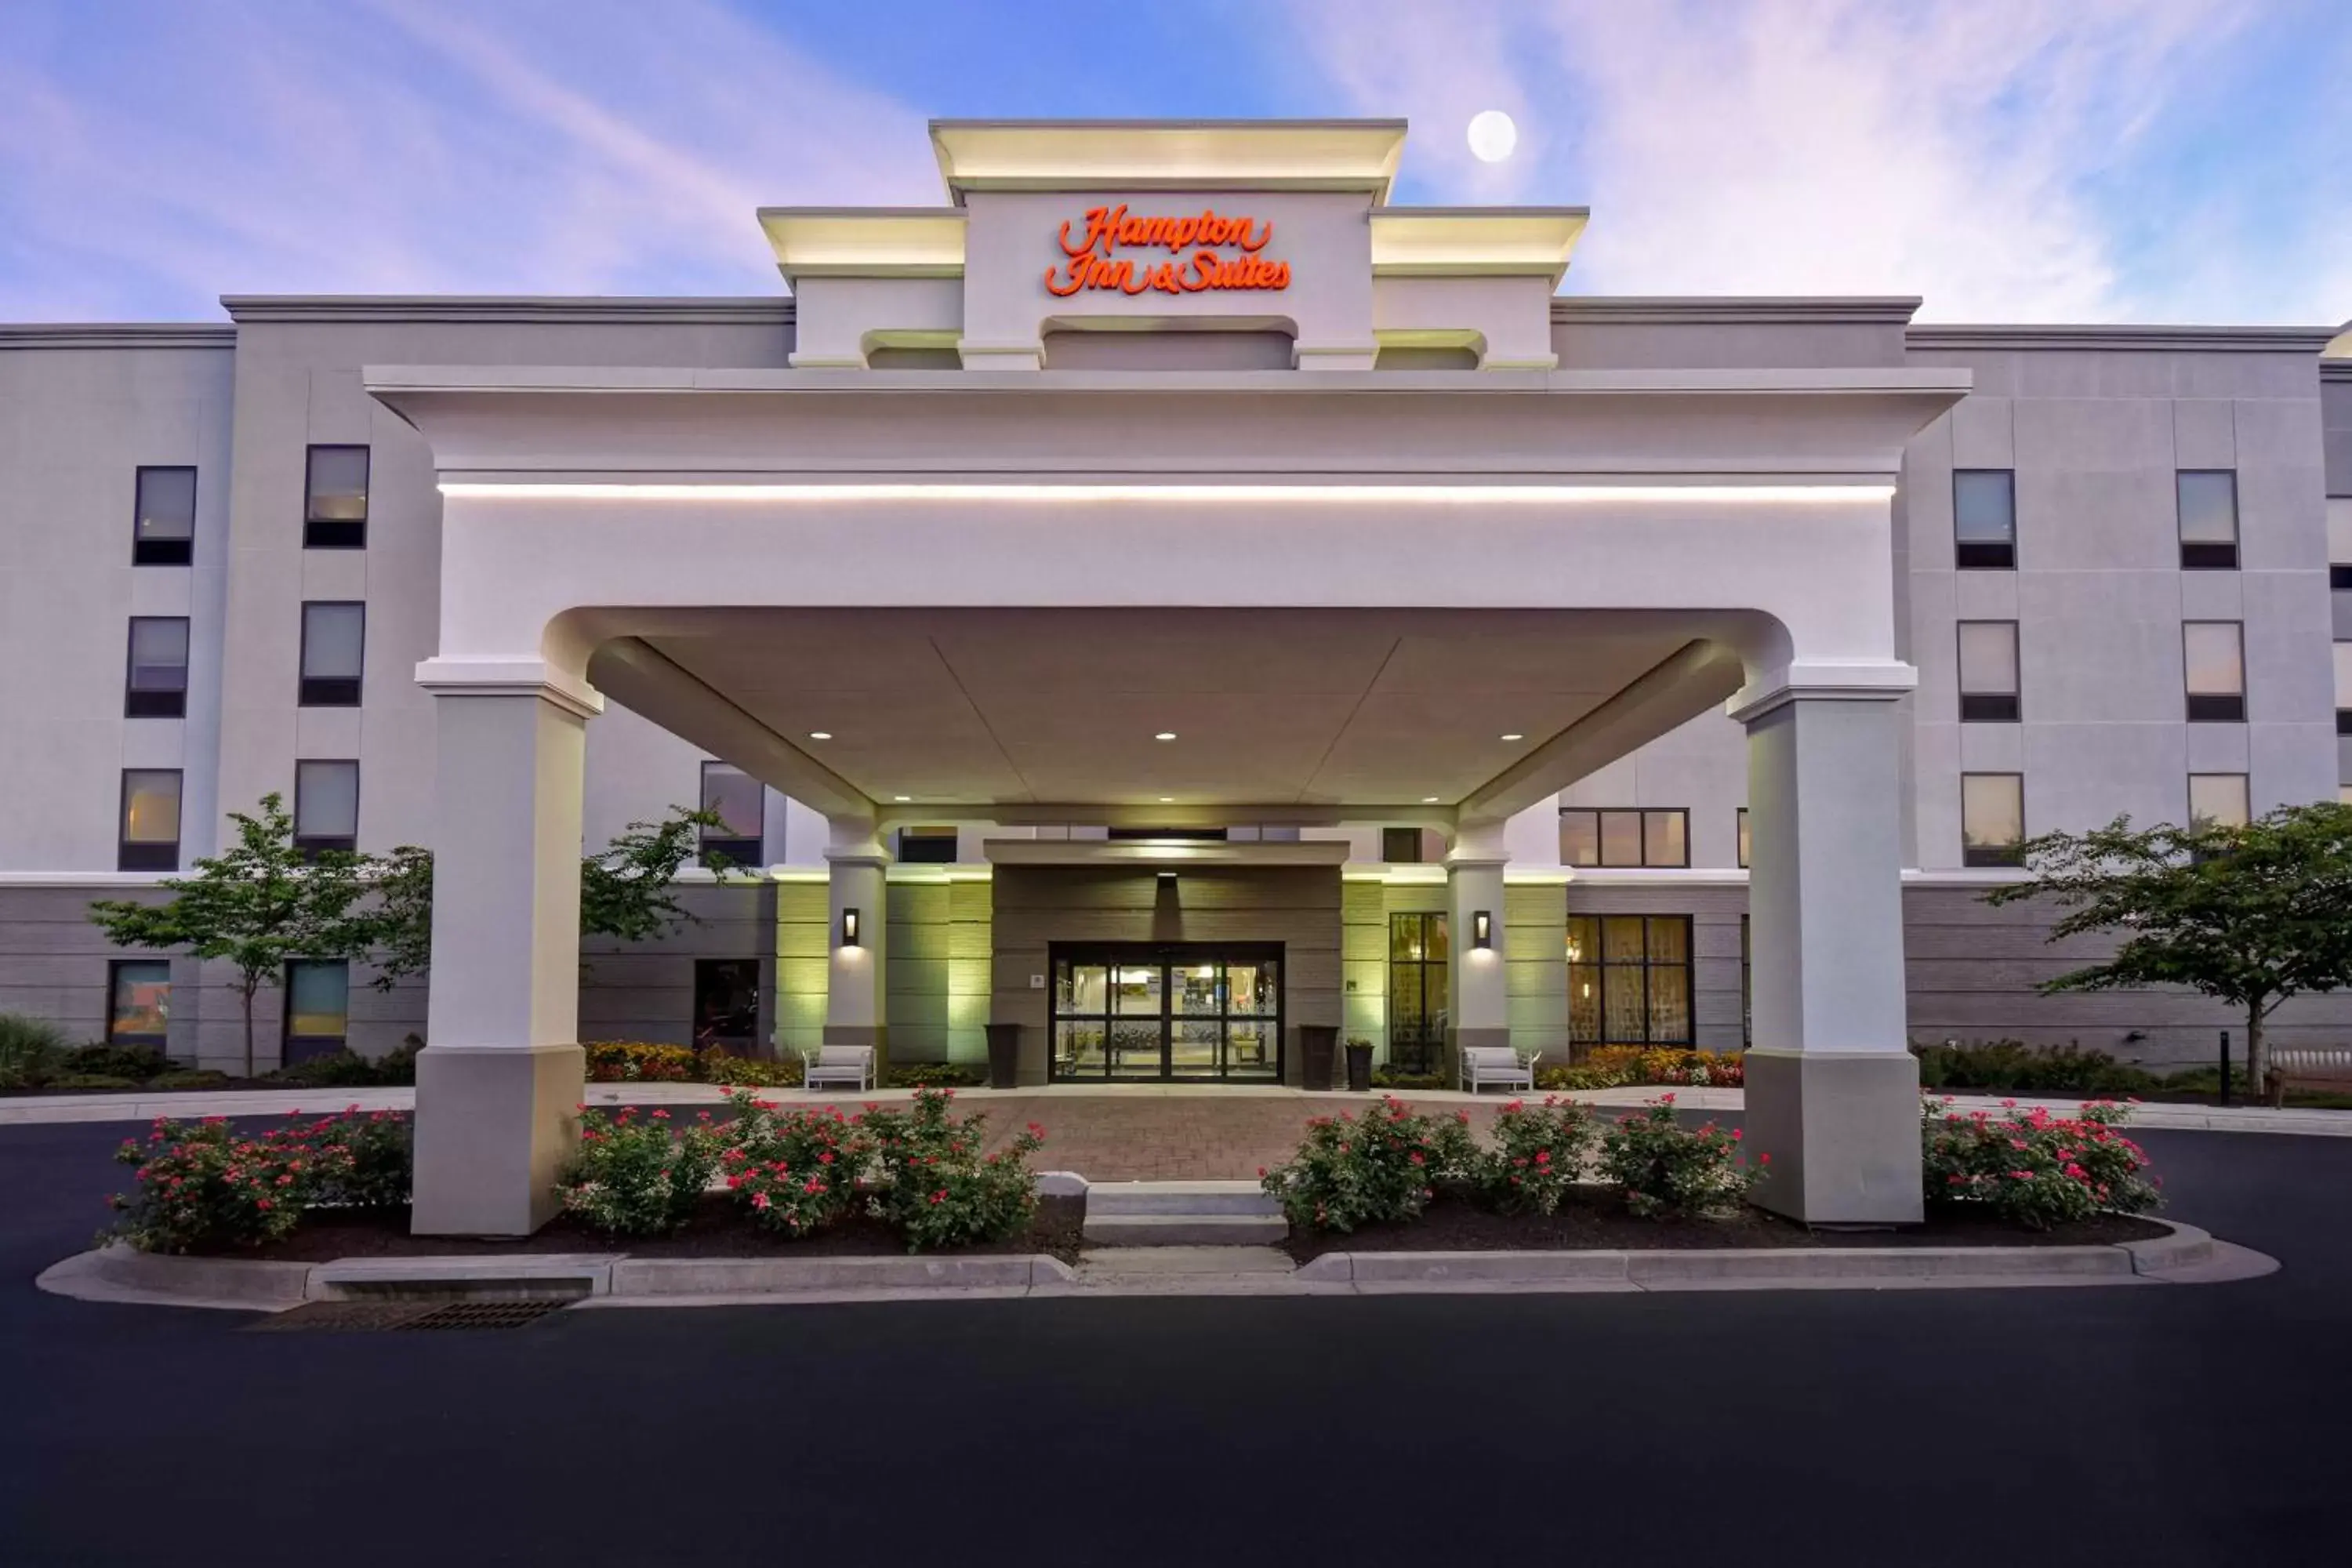 Property Building in Hampton Inn & Suites - Columbia South, MD